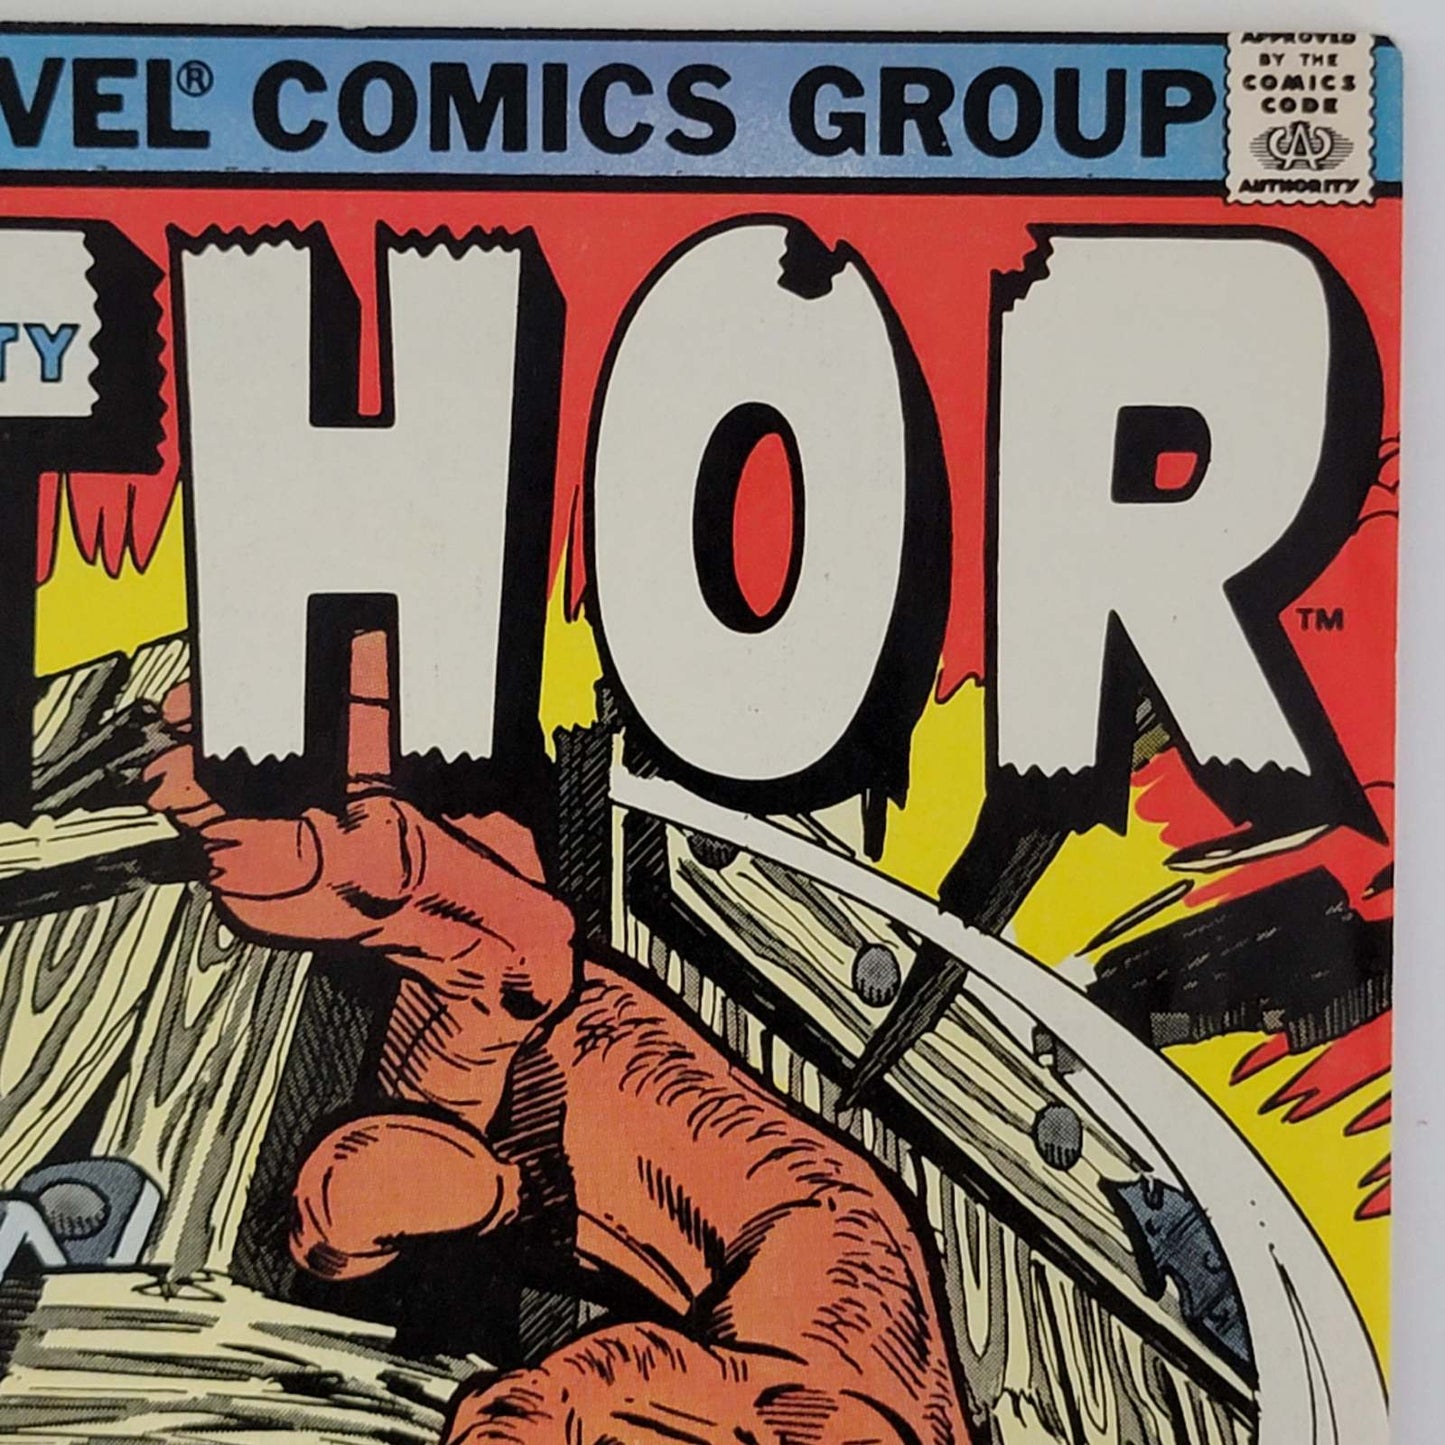 Mighty Thor, the #293